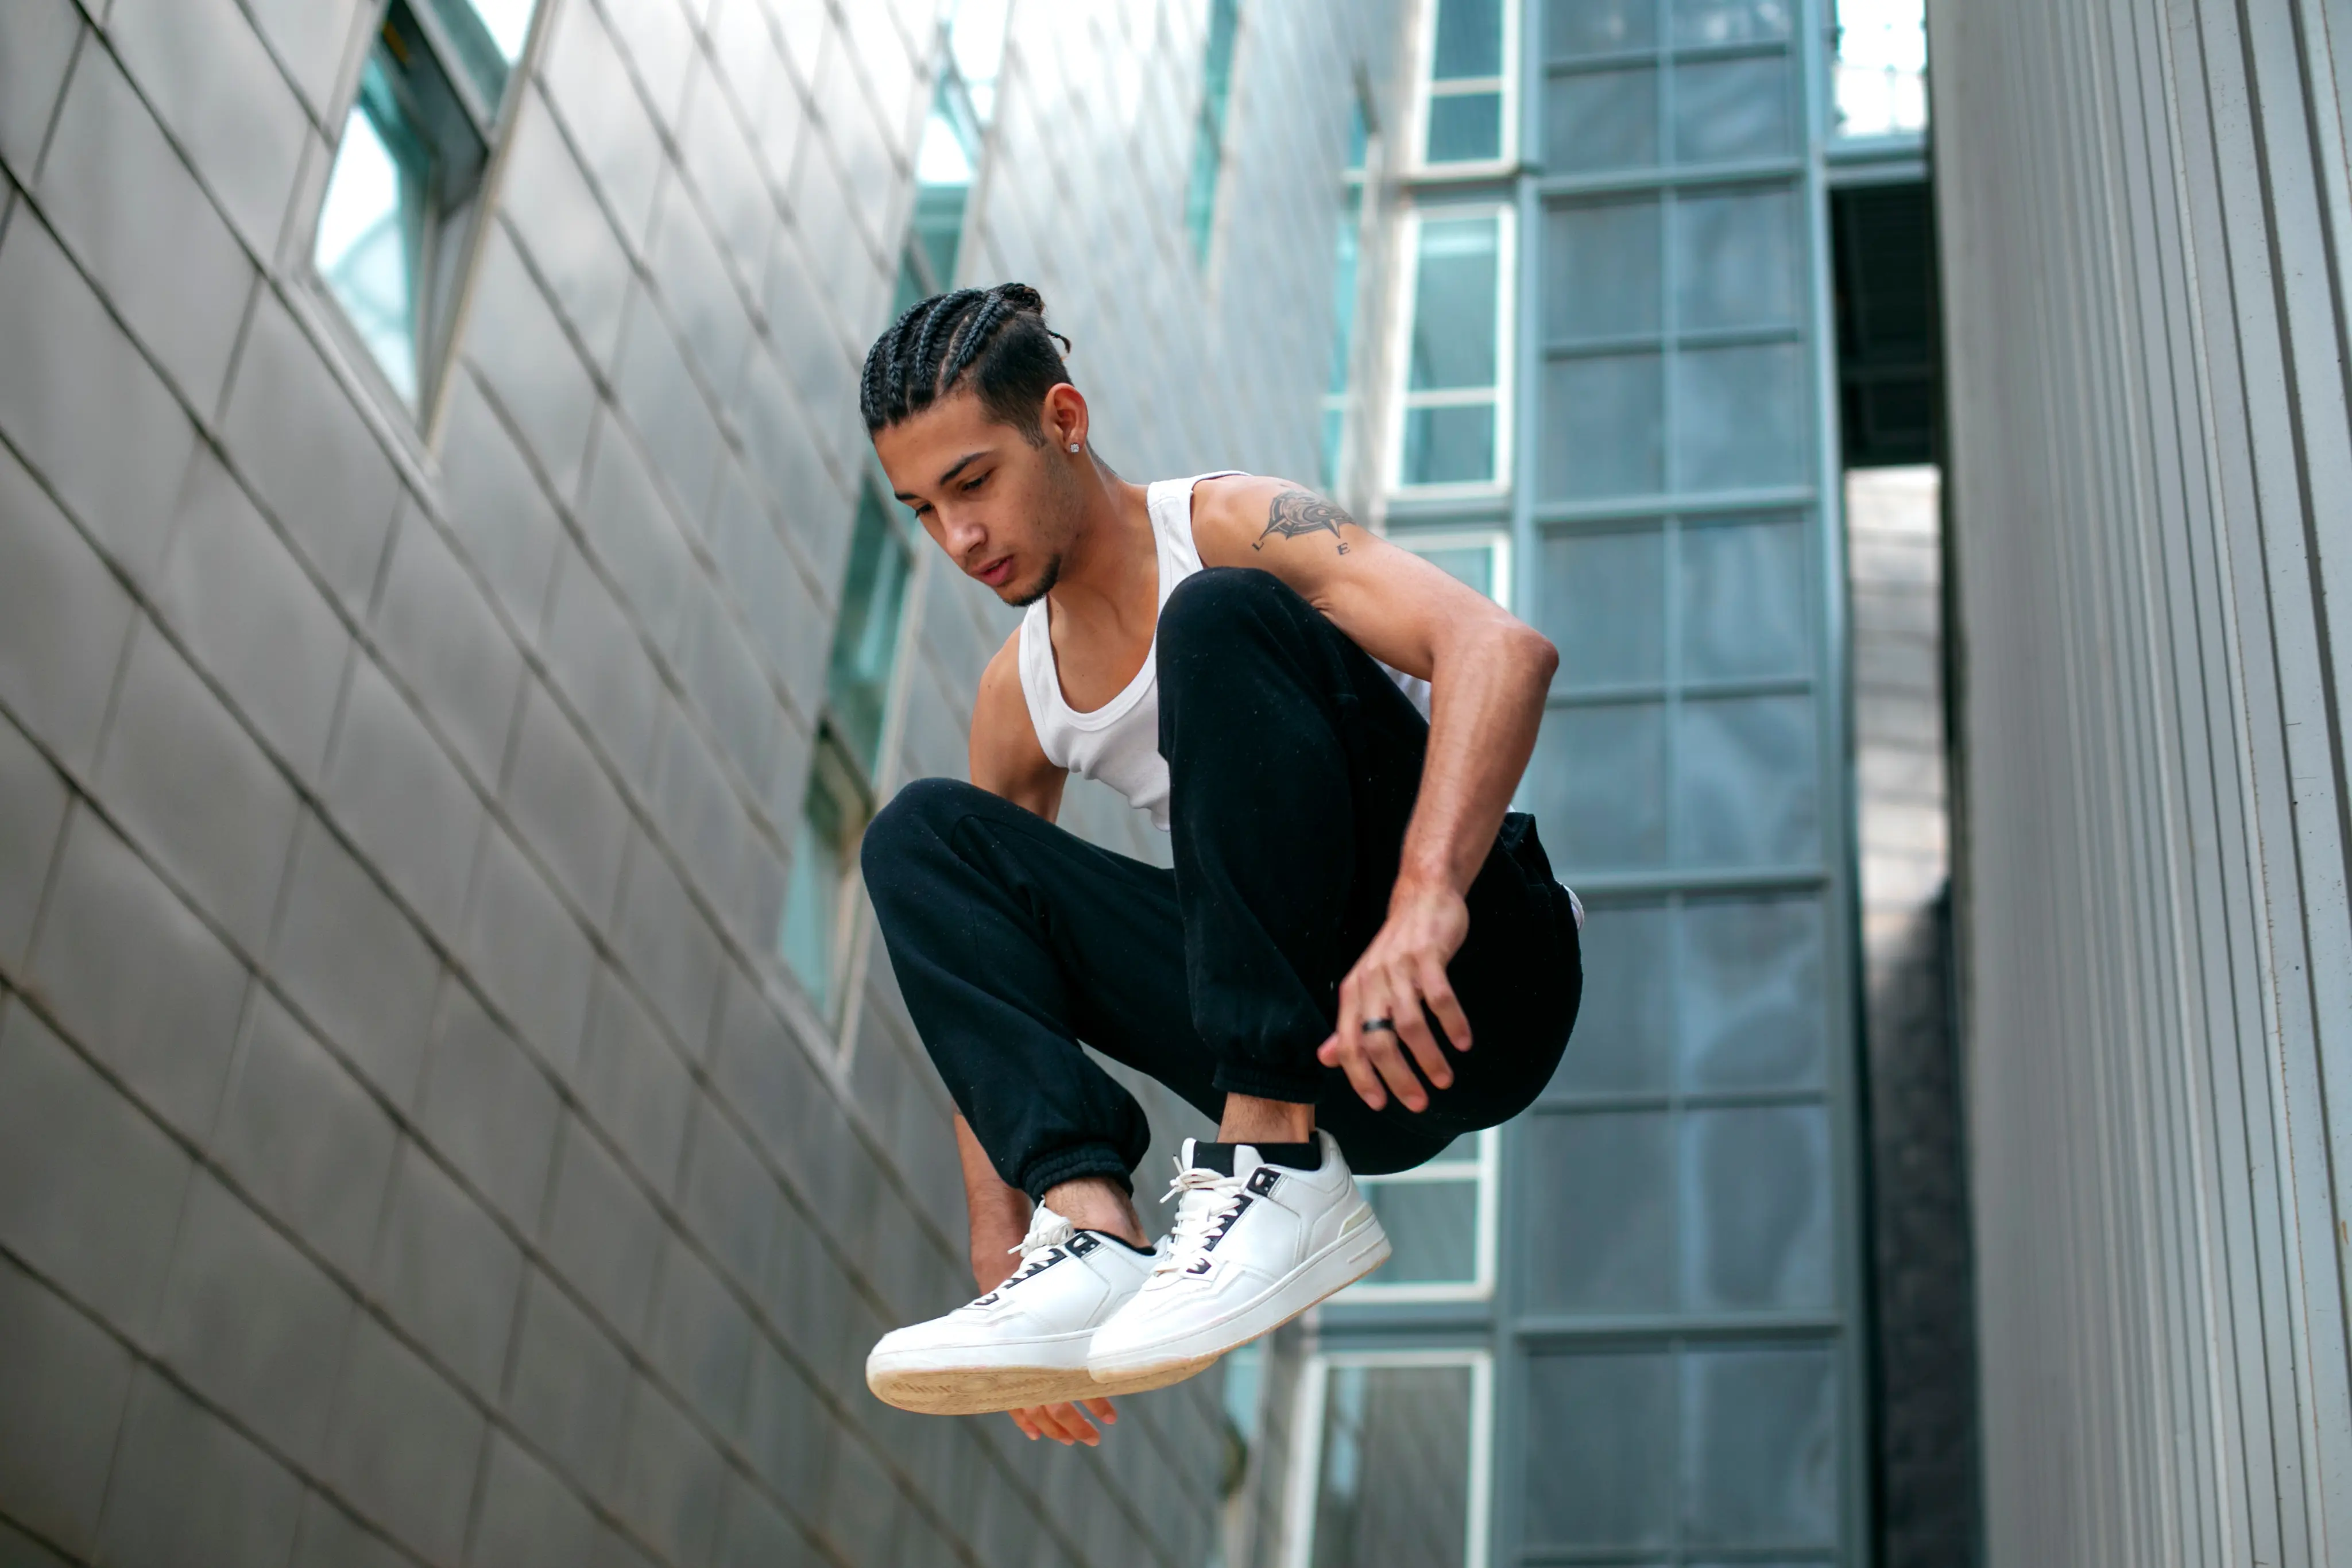 Athletic man in mid-air performing a parkour jump in an urban setting